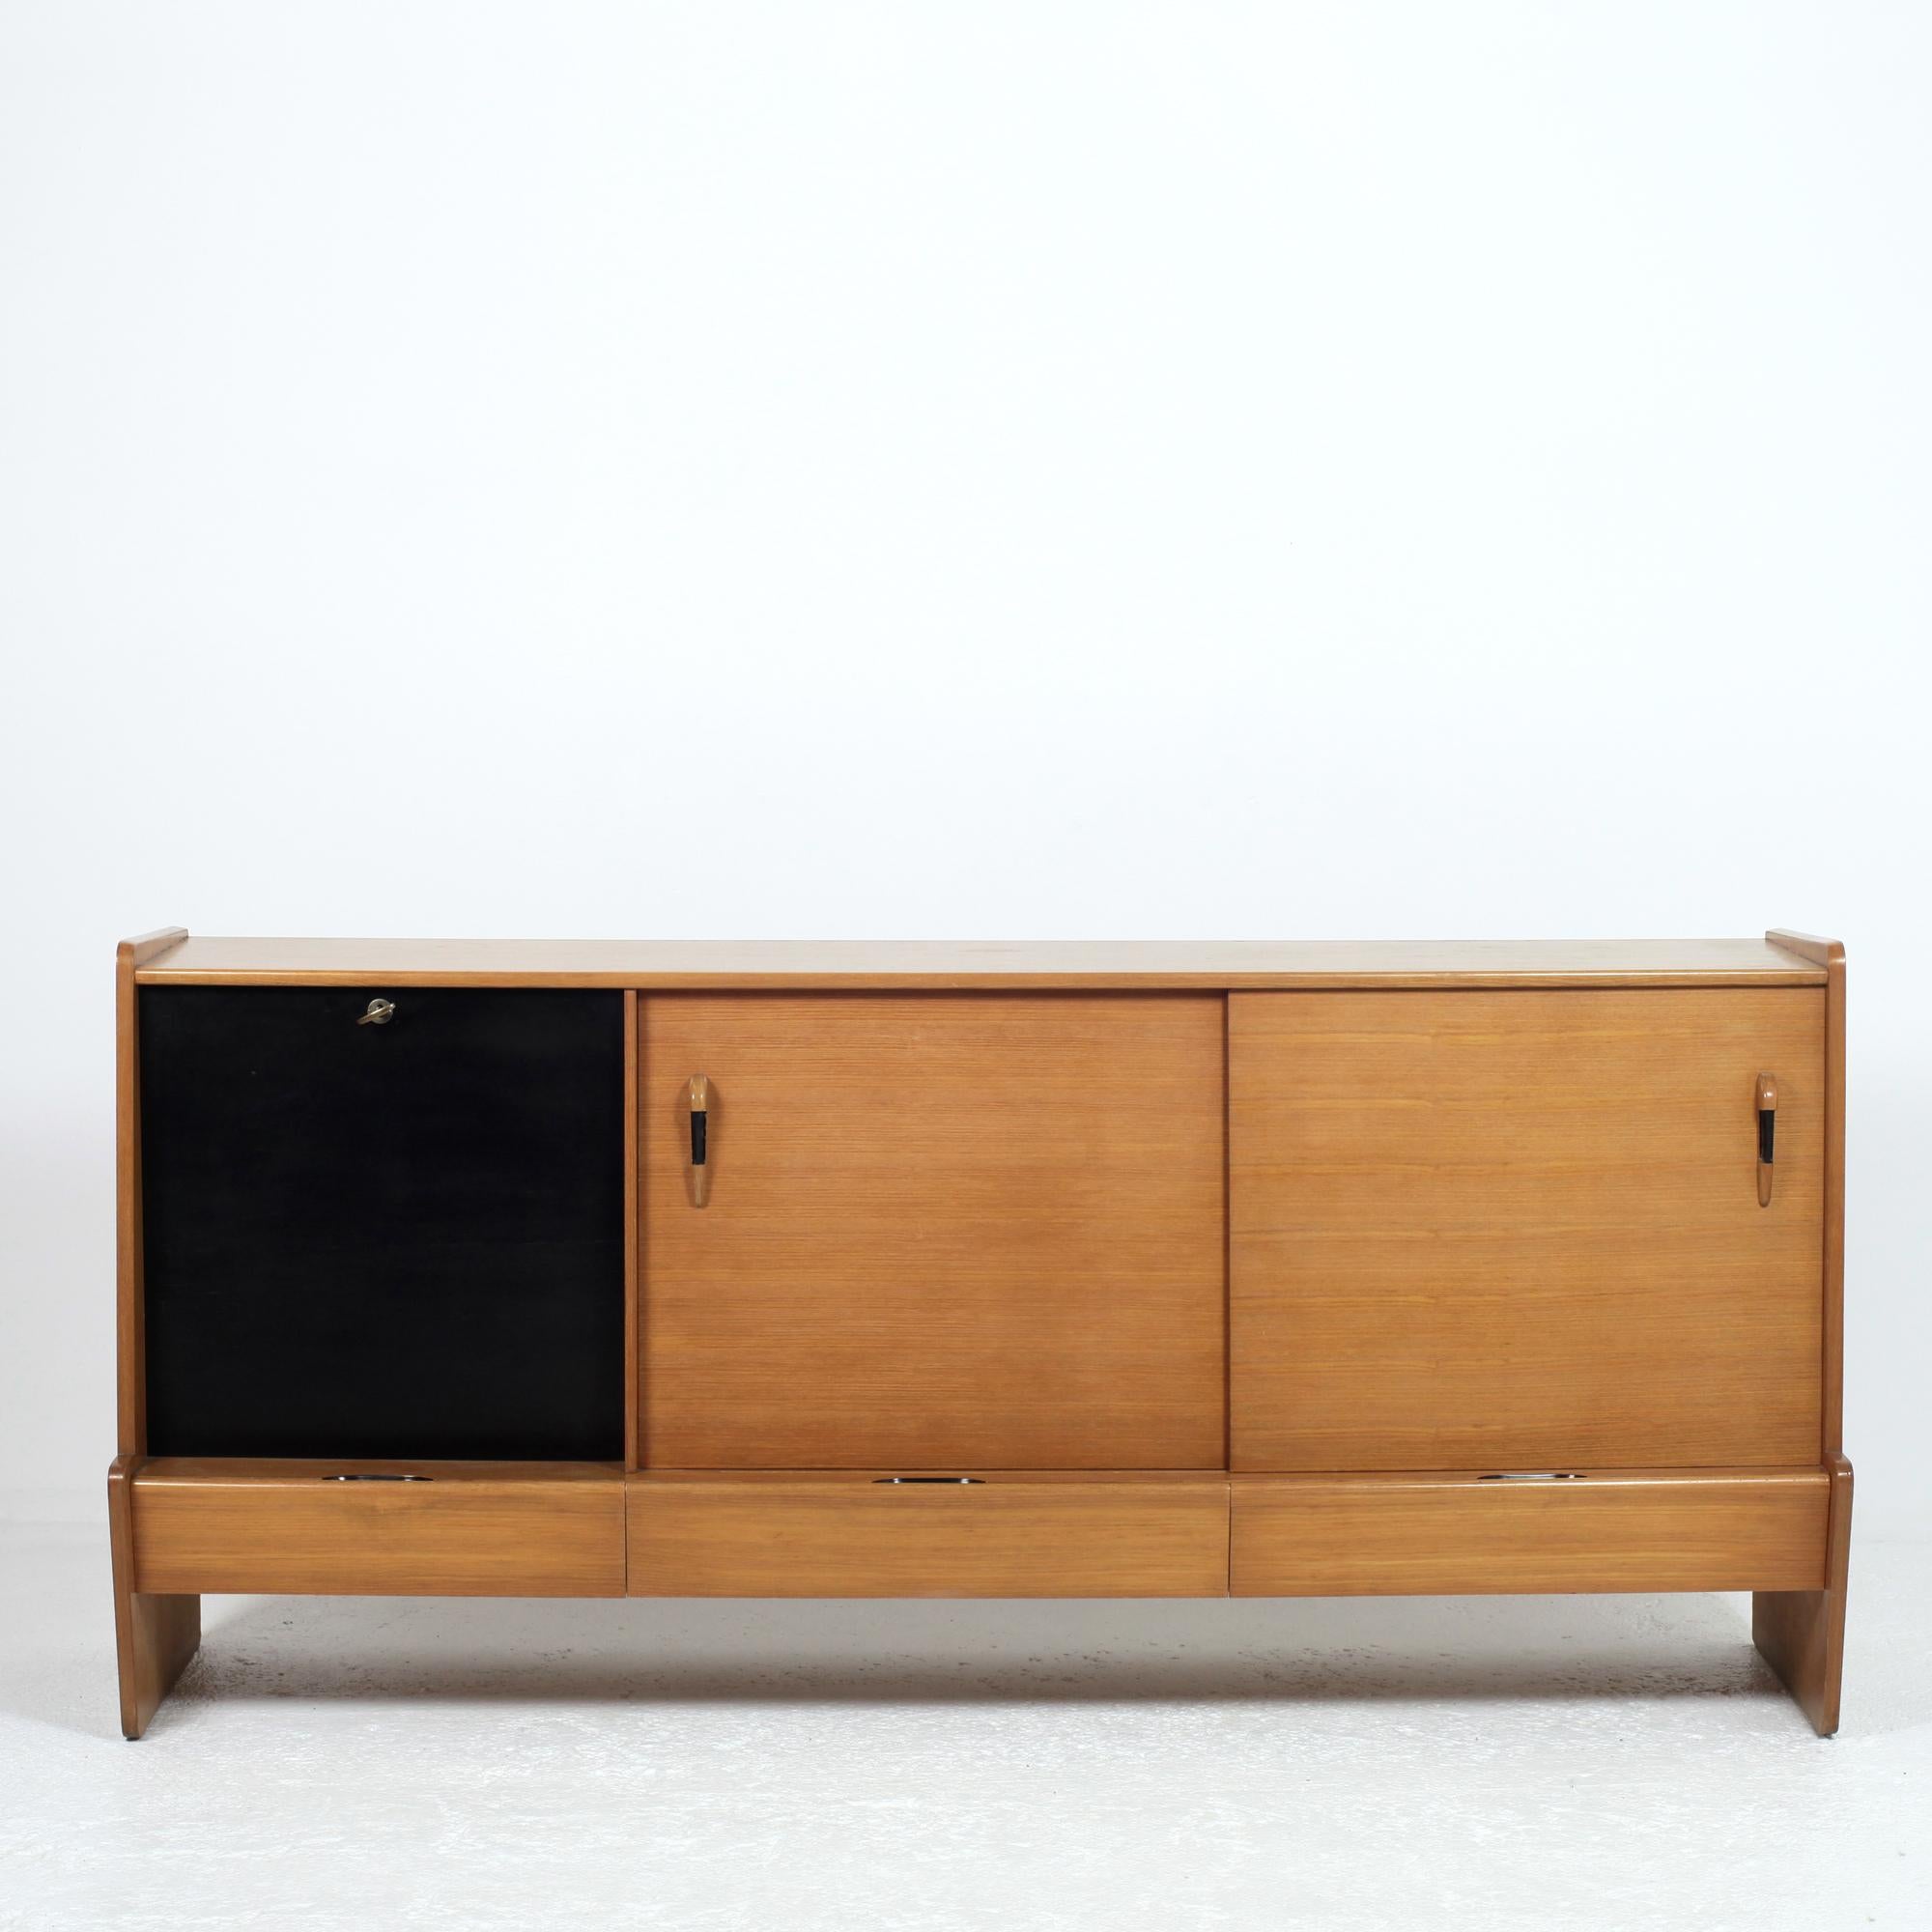 Wood French Midcentury Sideboard by Roche Bobois circa 1950 For Sale